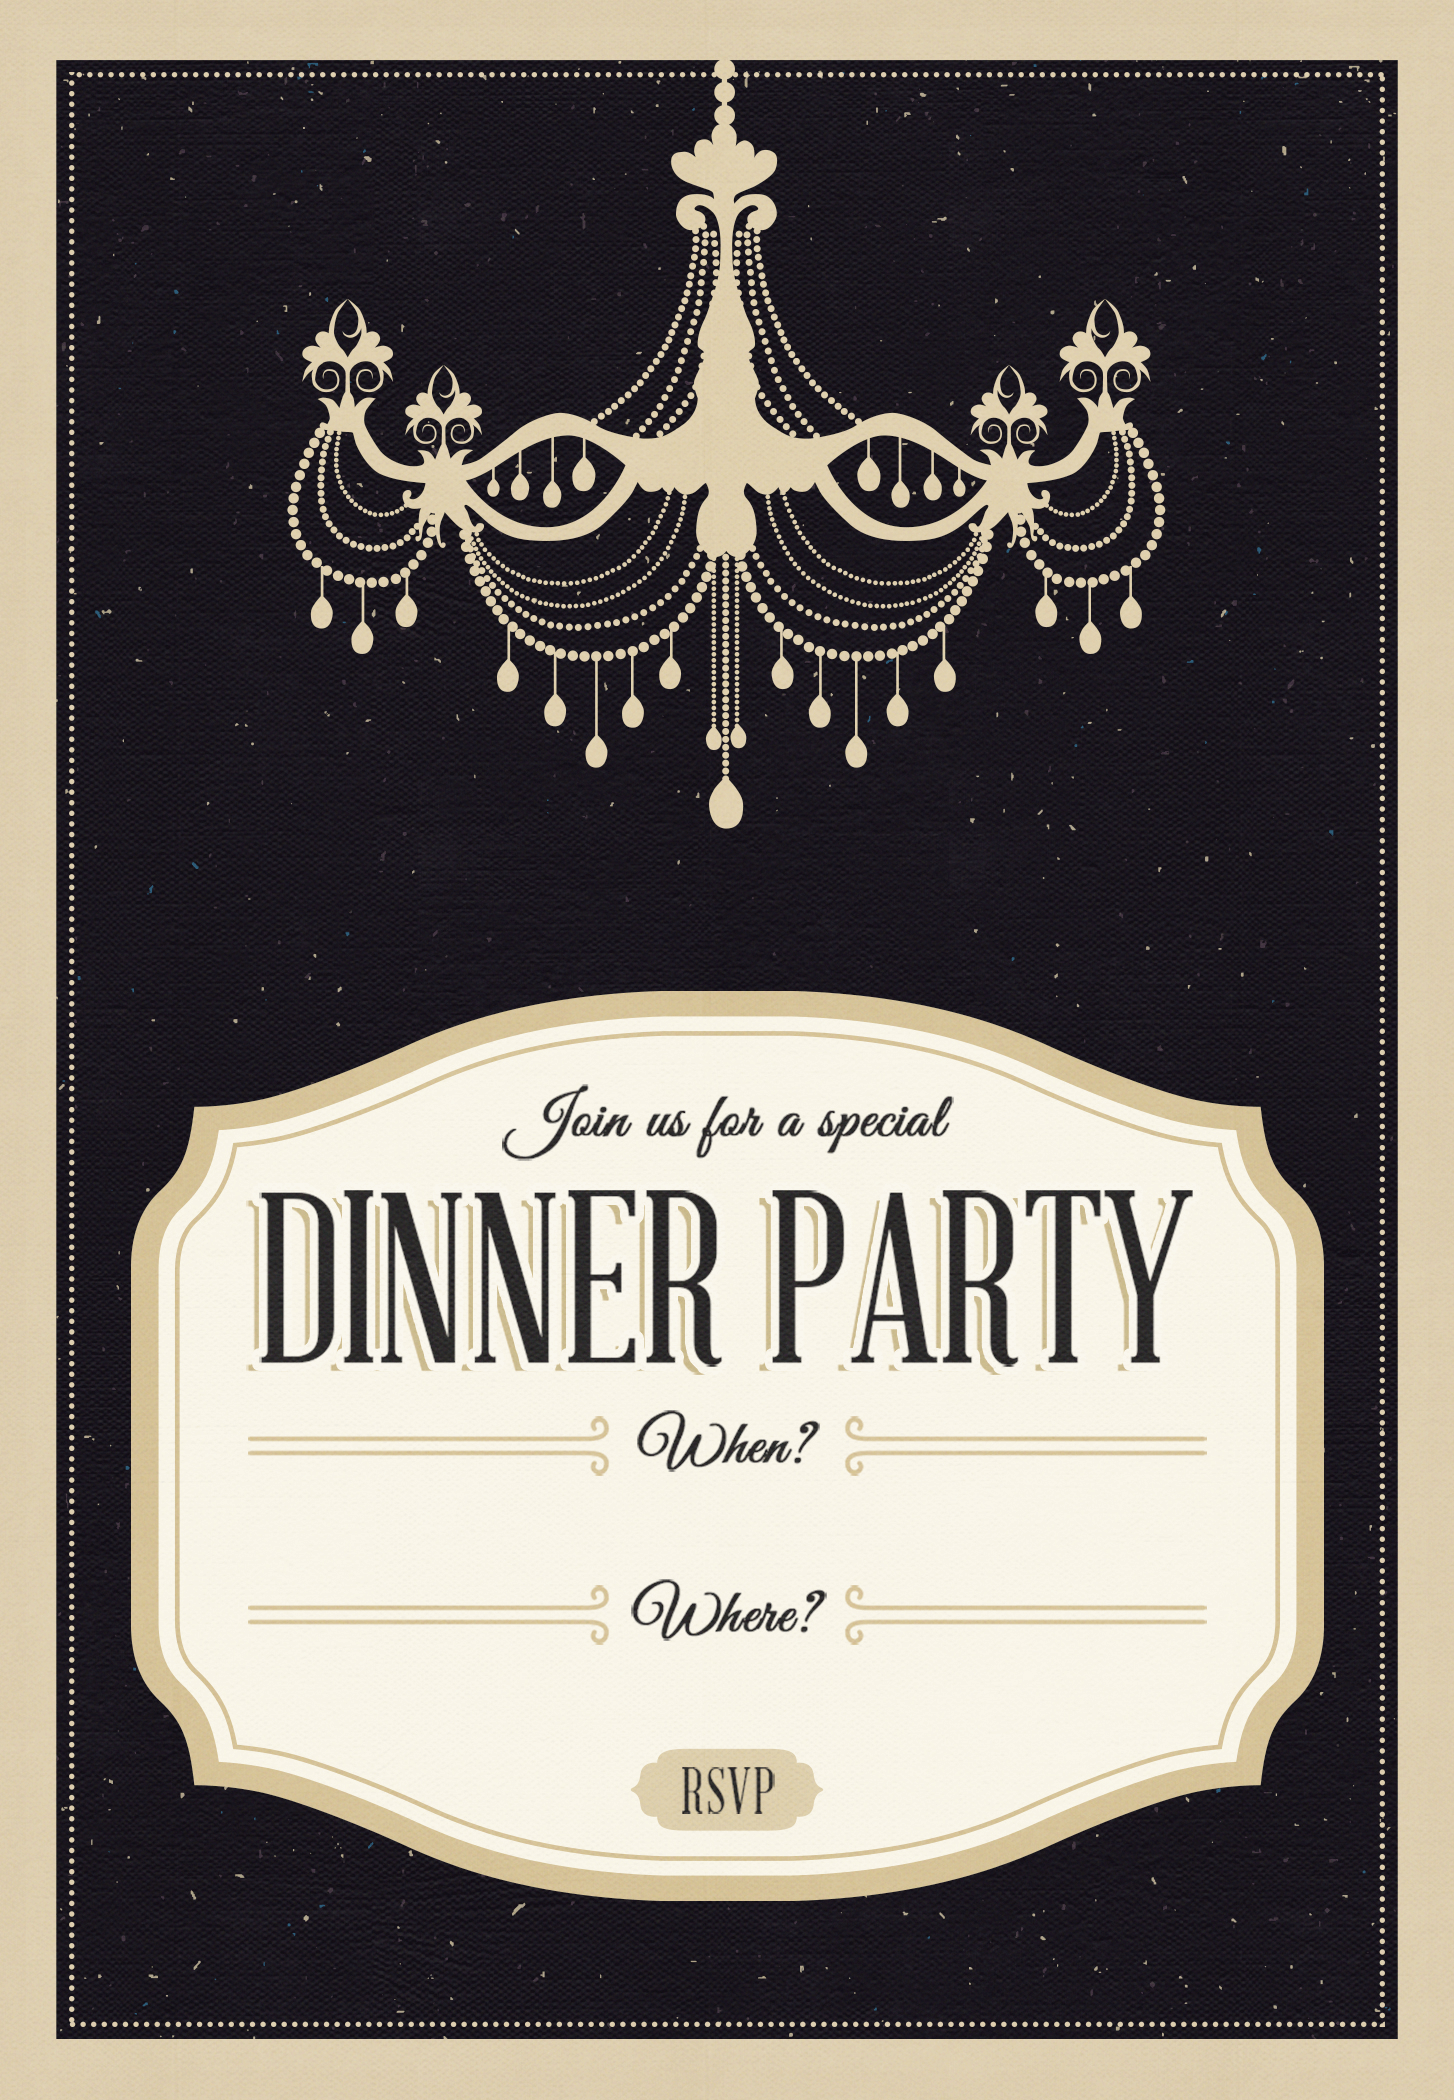 96 Visiting Dinner Party Invitation Template Photo for Dinner Party Invitation Template